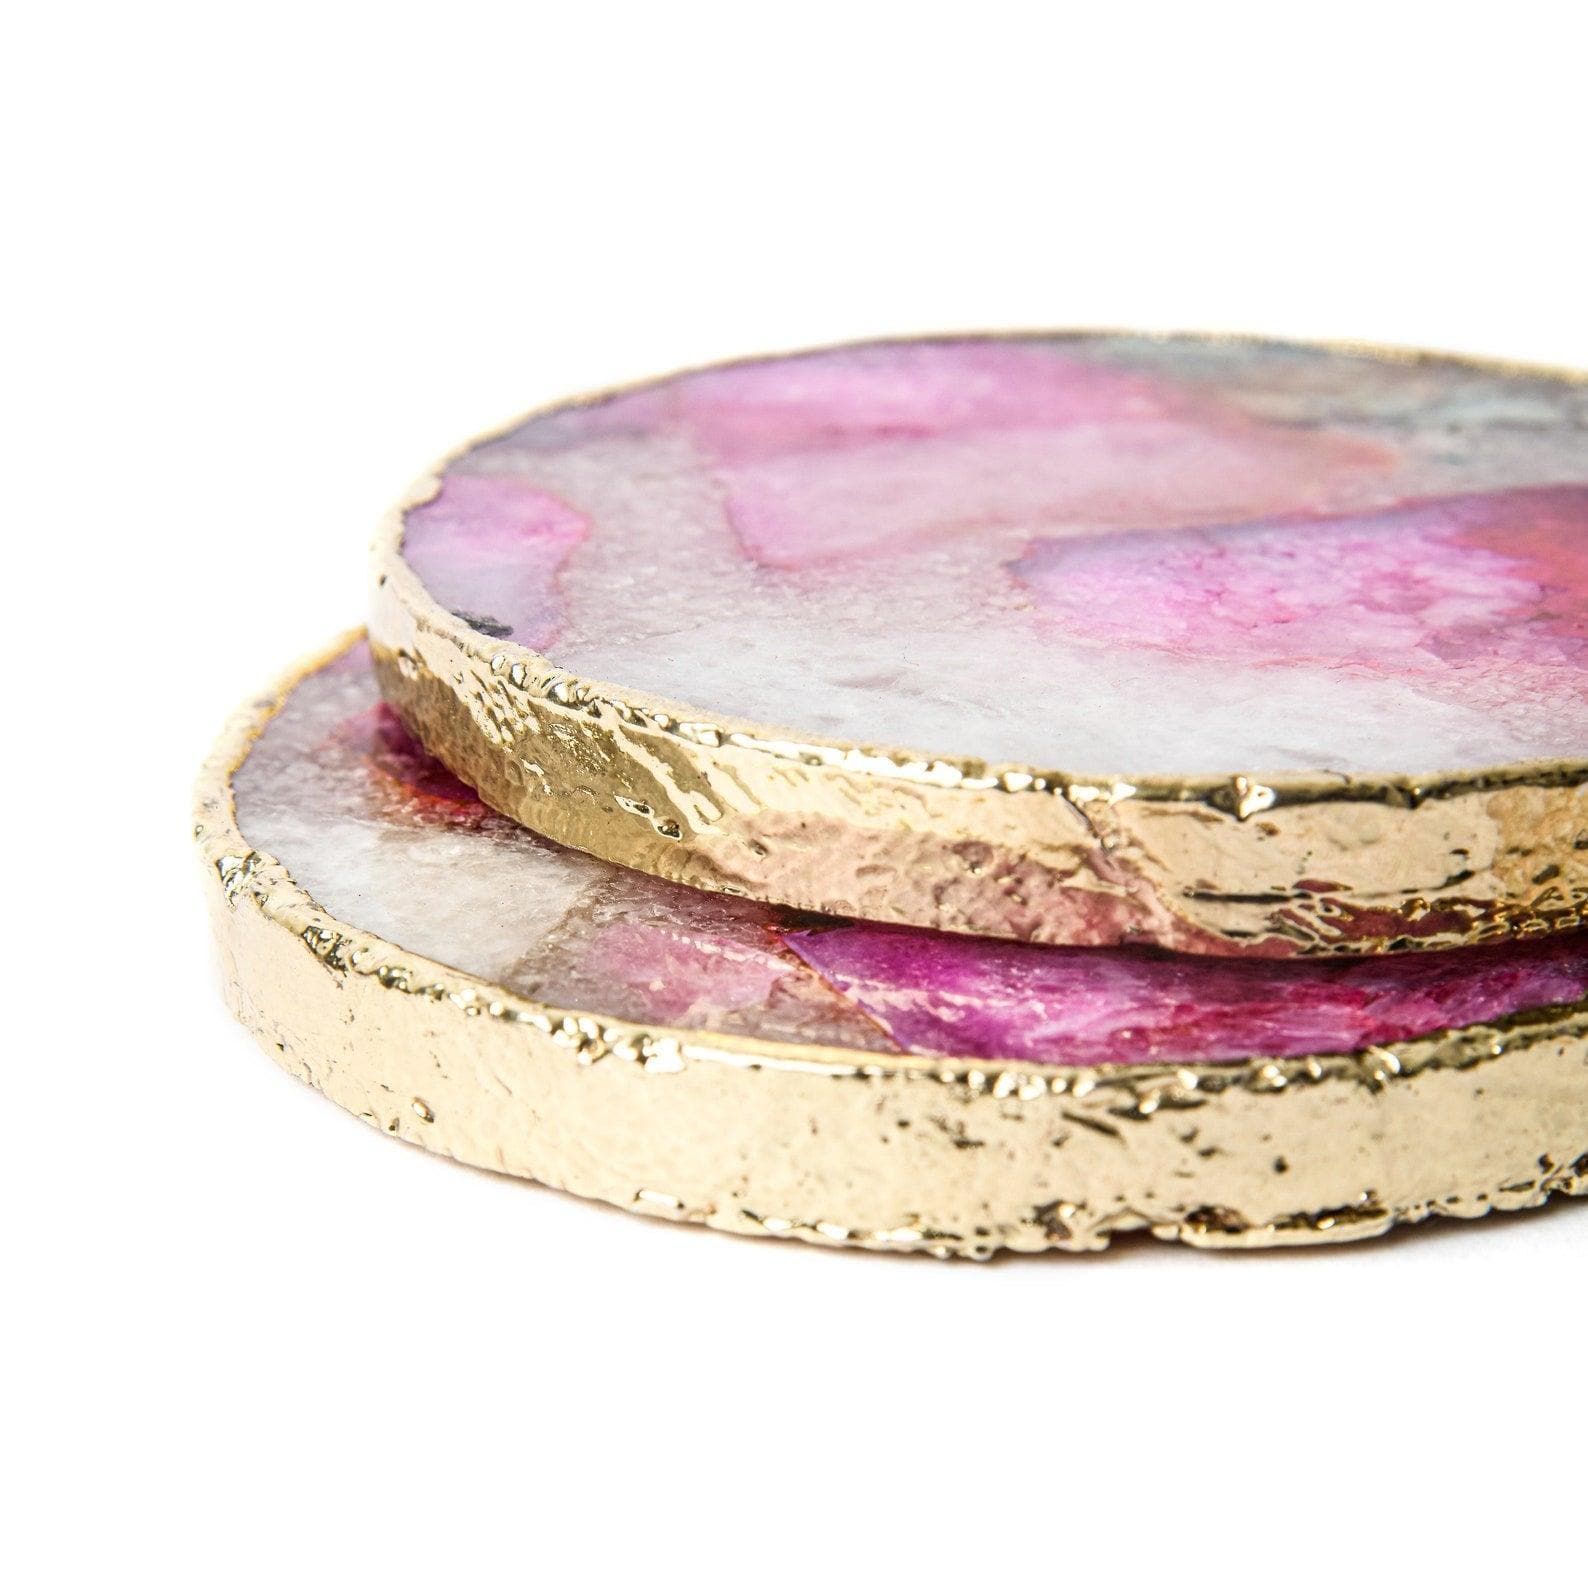 Gold Trim Round Pink Agate Crystal Geode Gemstone Coasters - Set of 4 - MAIA HOMES